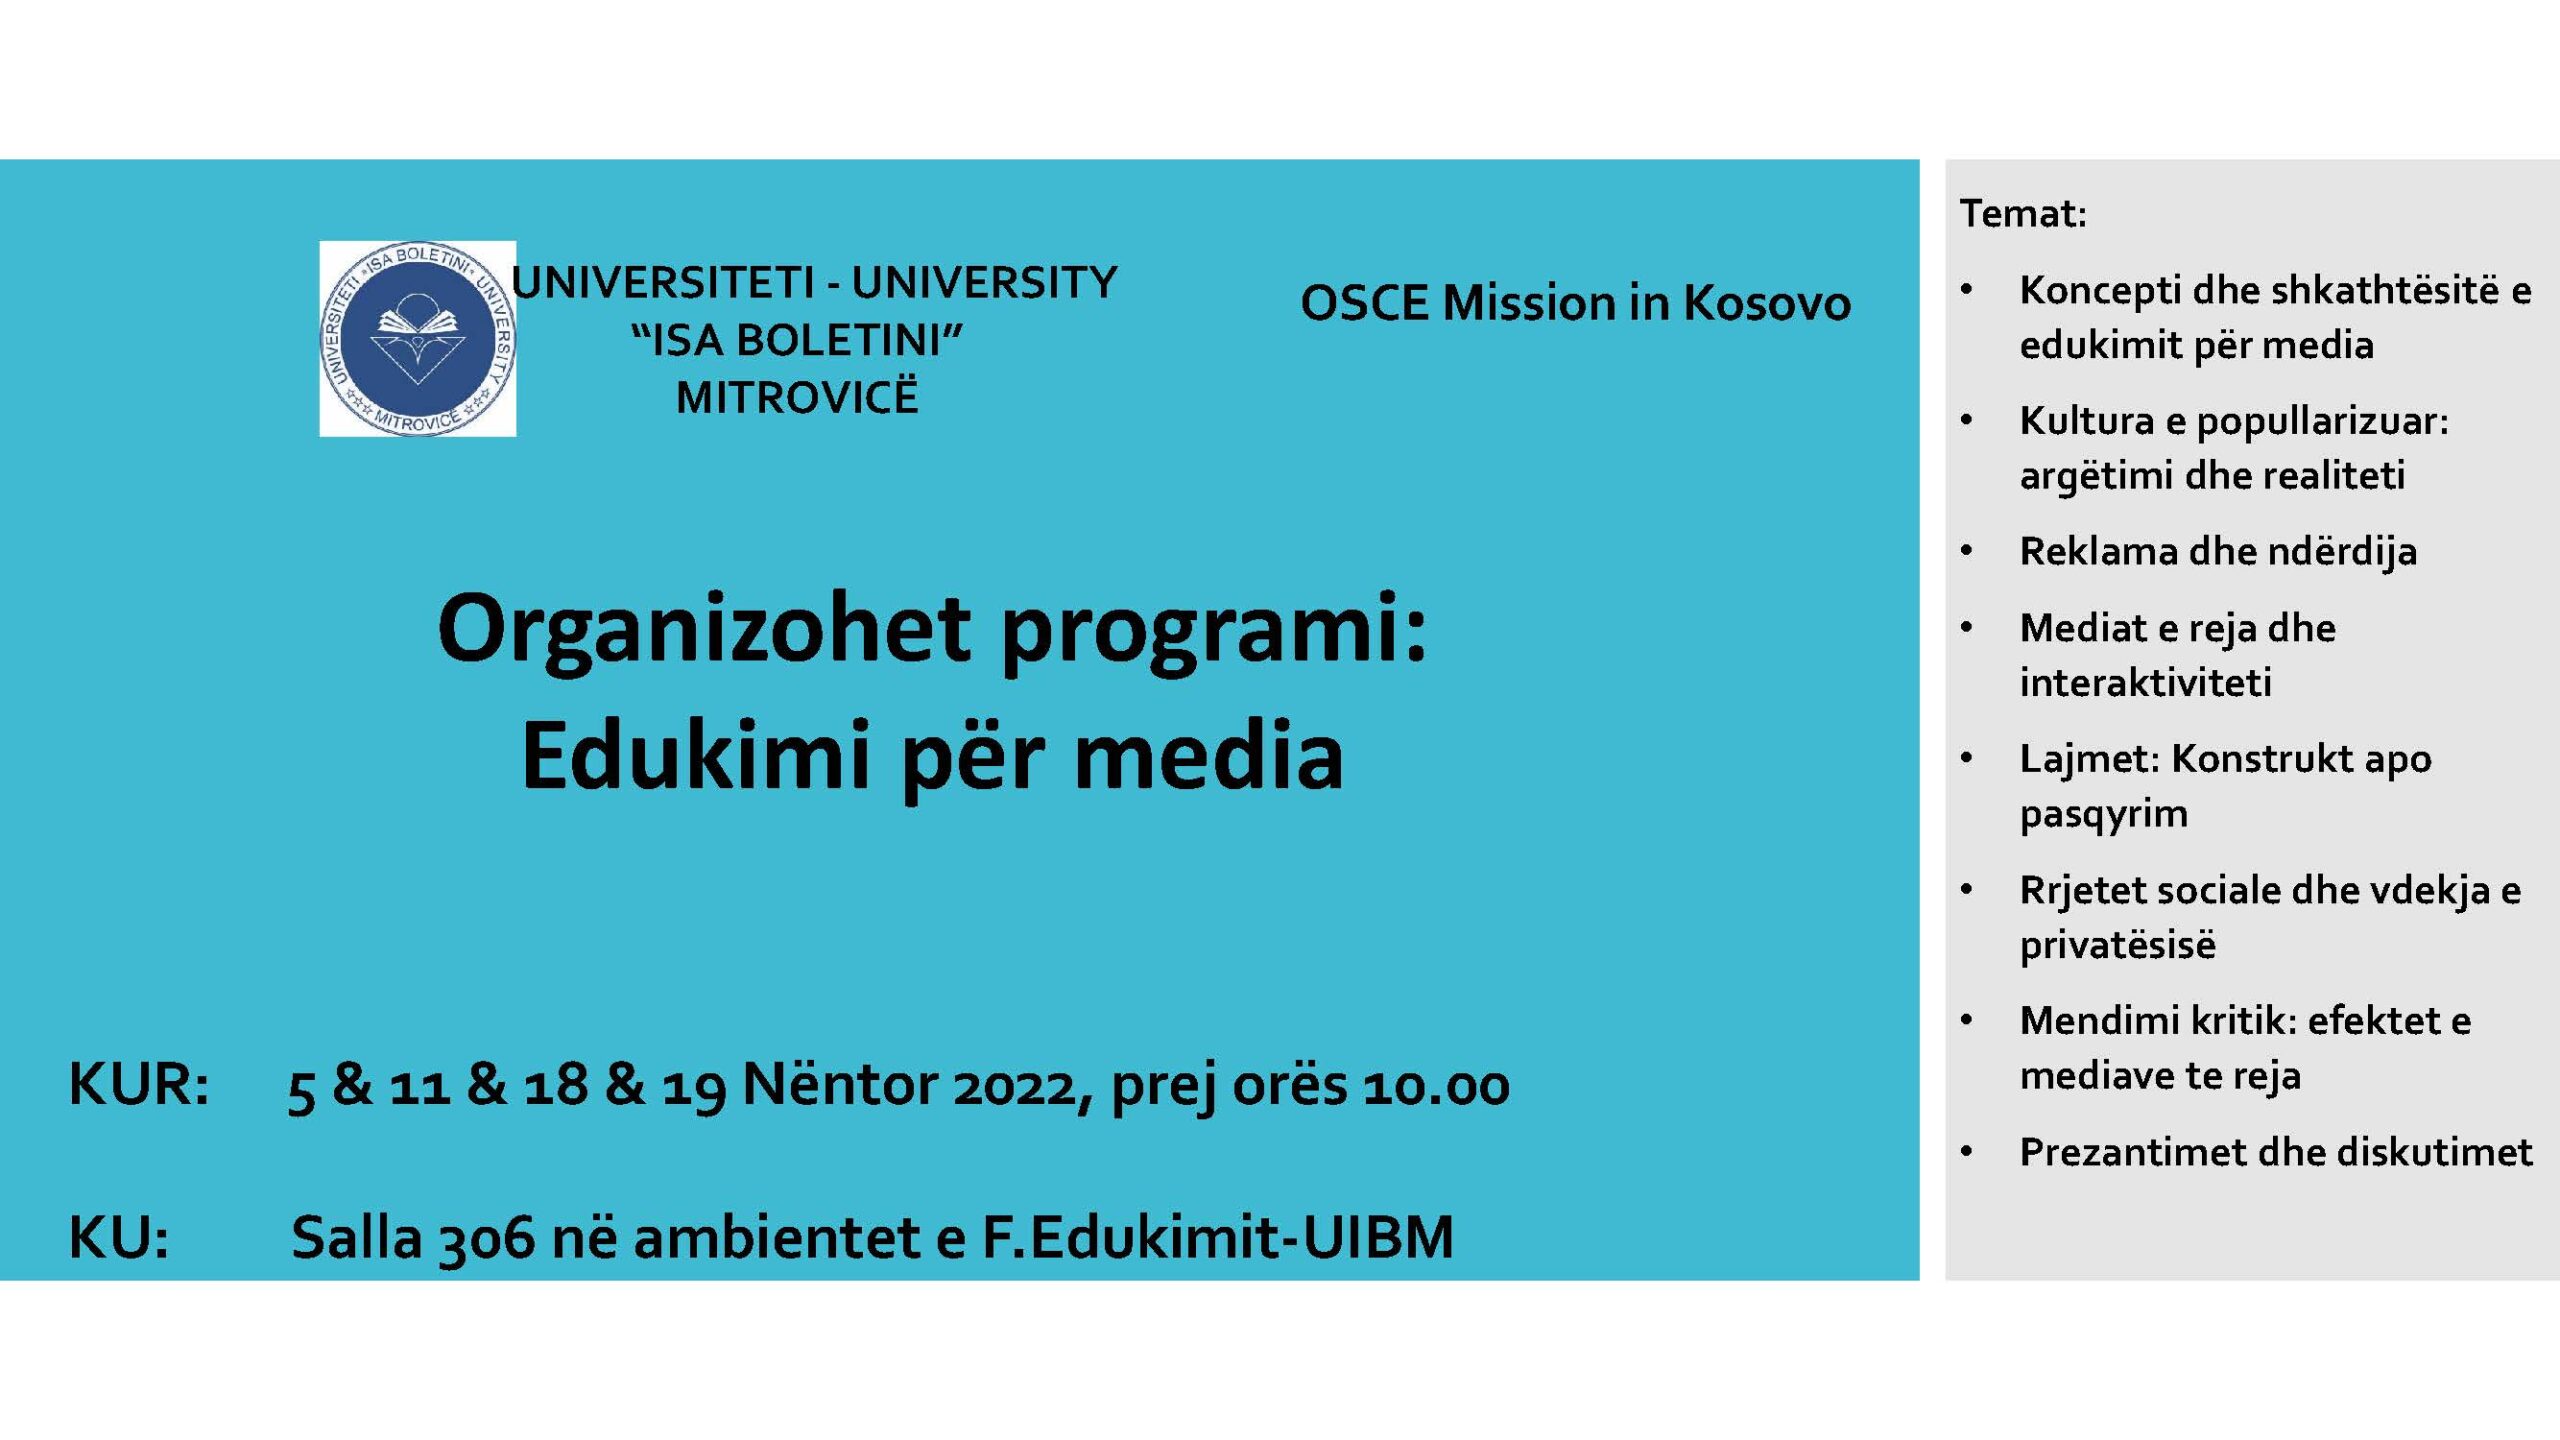 The Program: Education For Media Will Be Organized As A Collaboration With UIBM And OSCE Mission In Kosovo